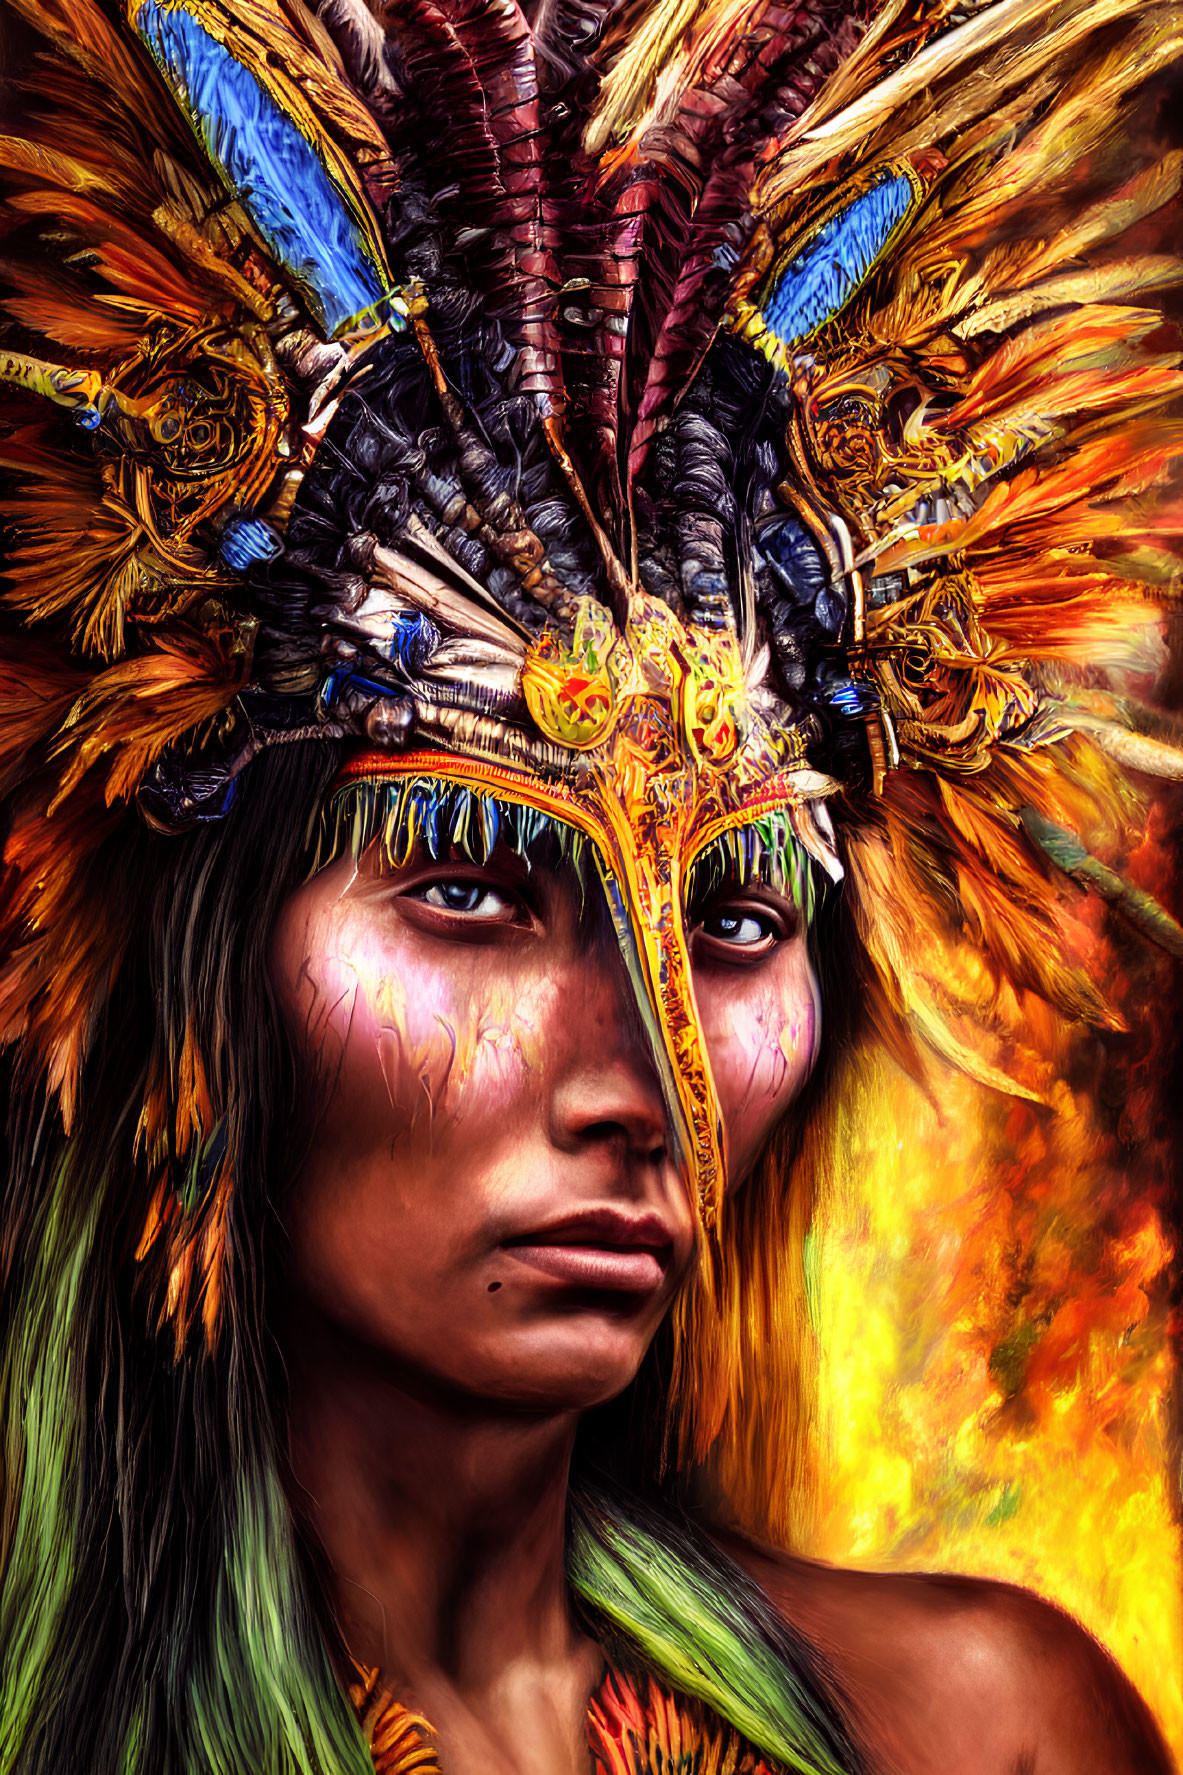 Intense gaze and colorful feathered headdress with tribal facial paint